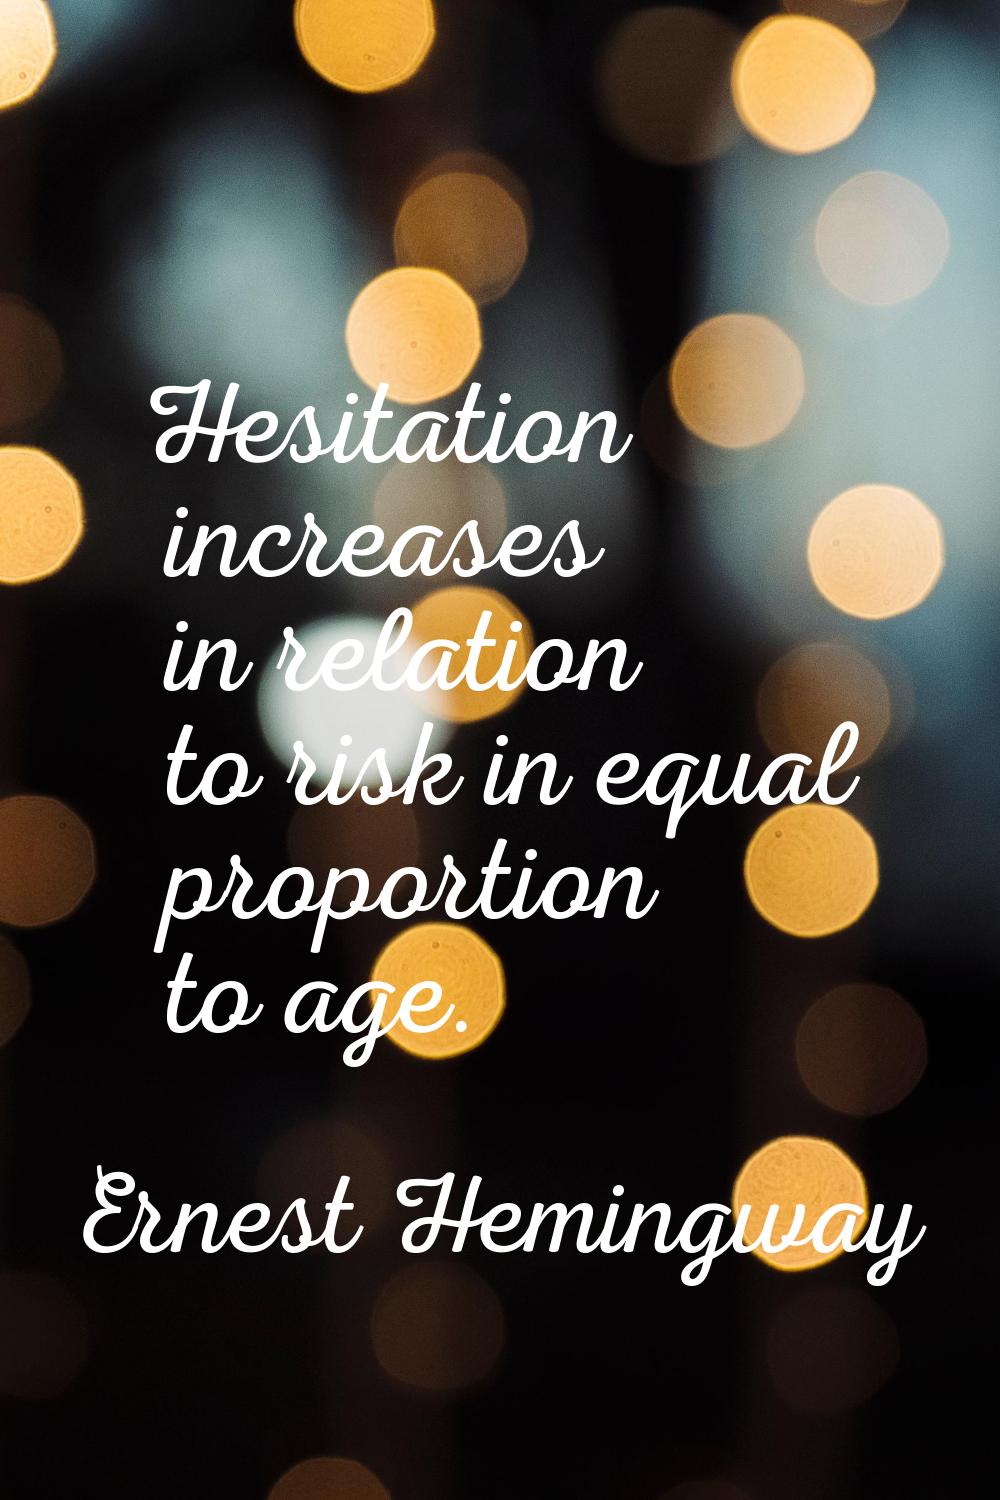 Hesitation increases in relation to risk in equal proportion to age.